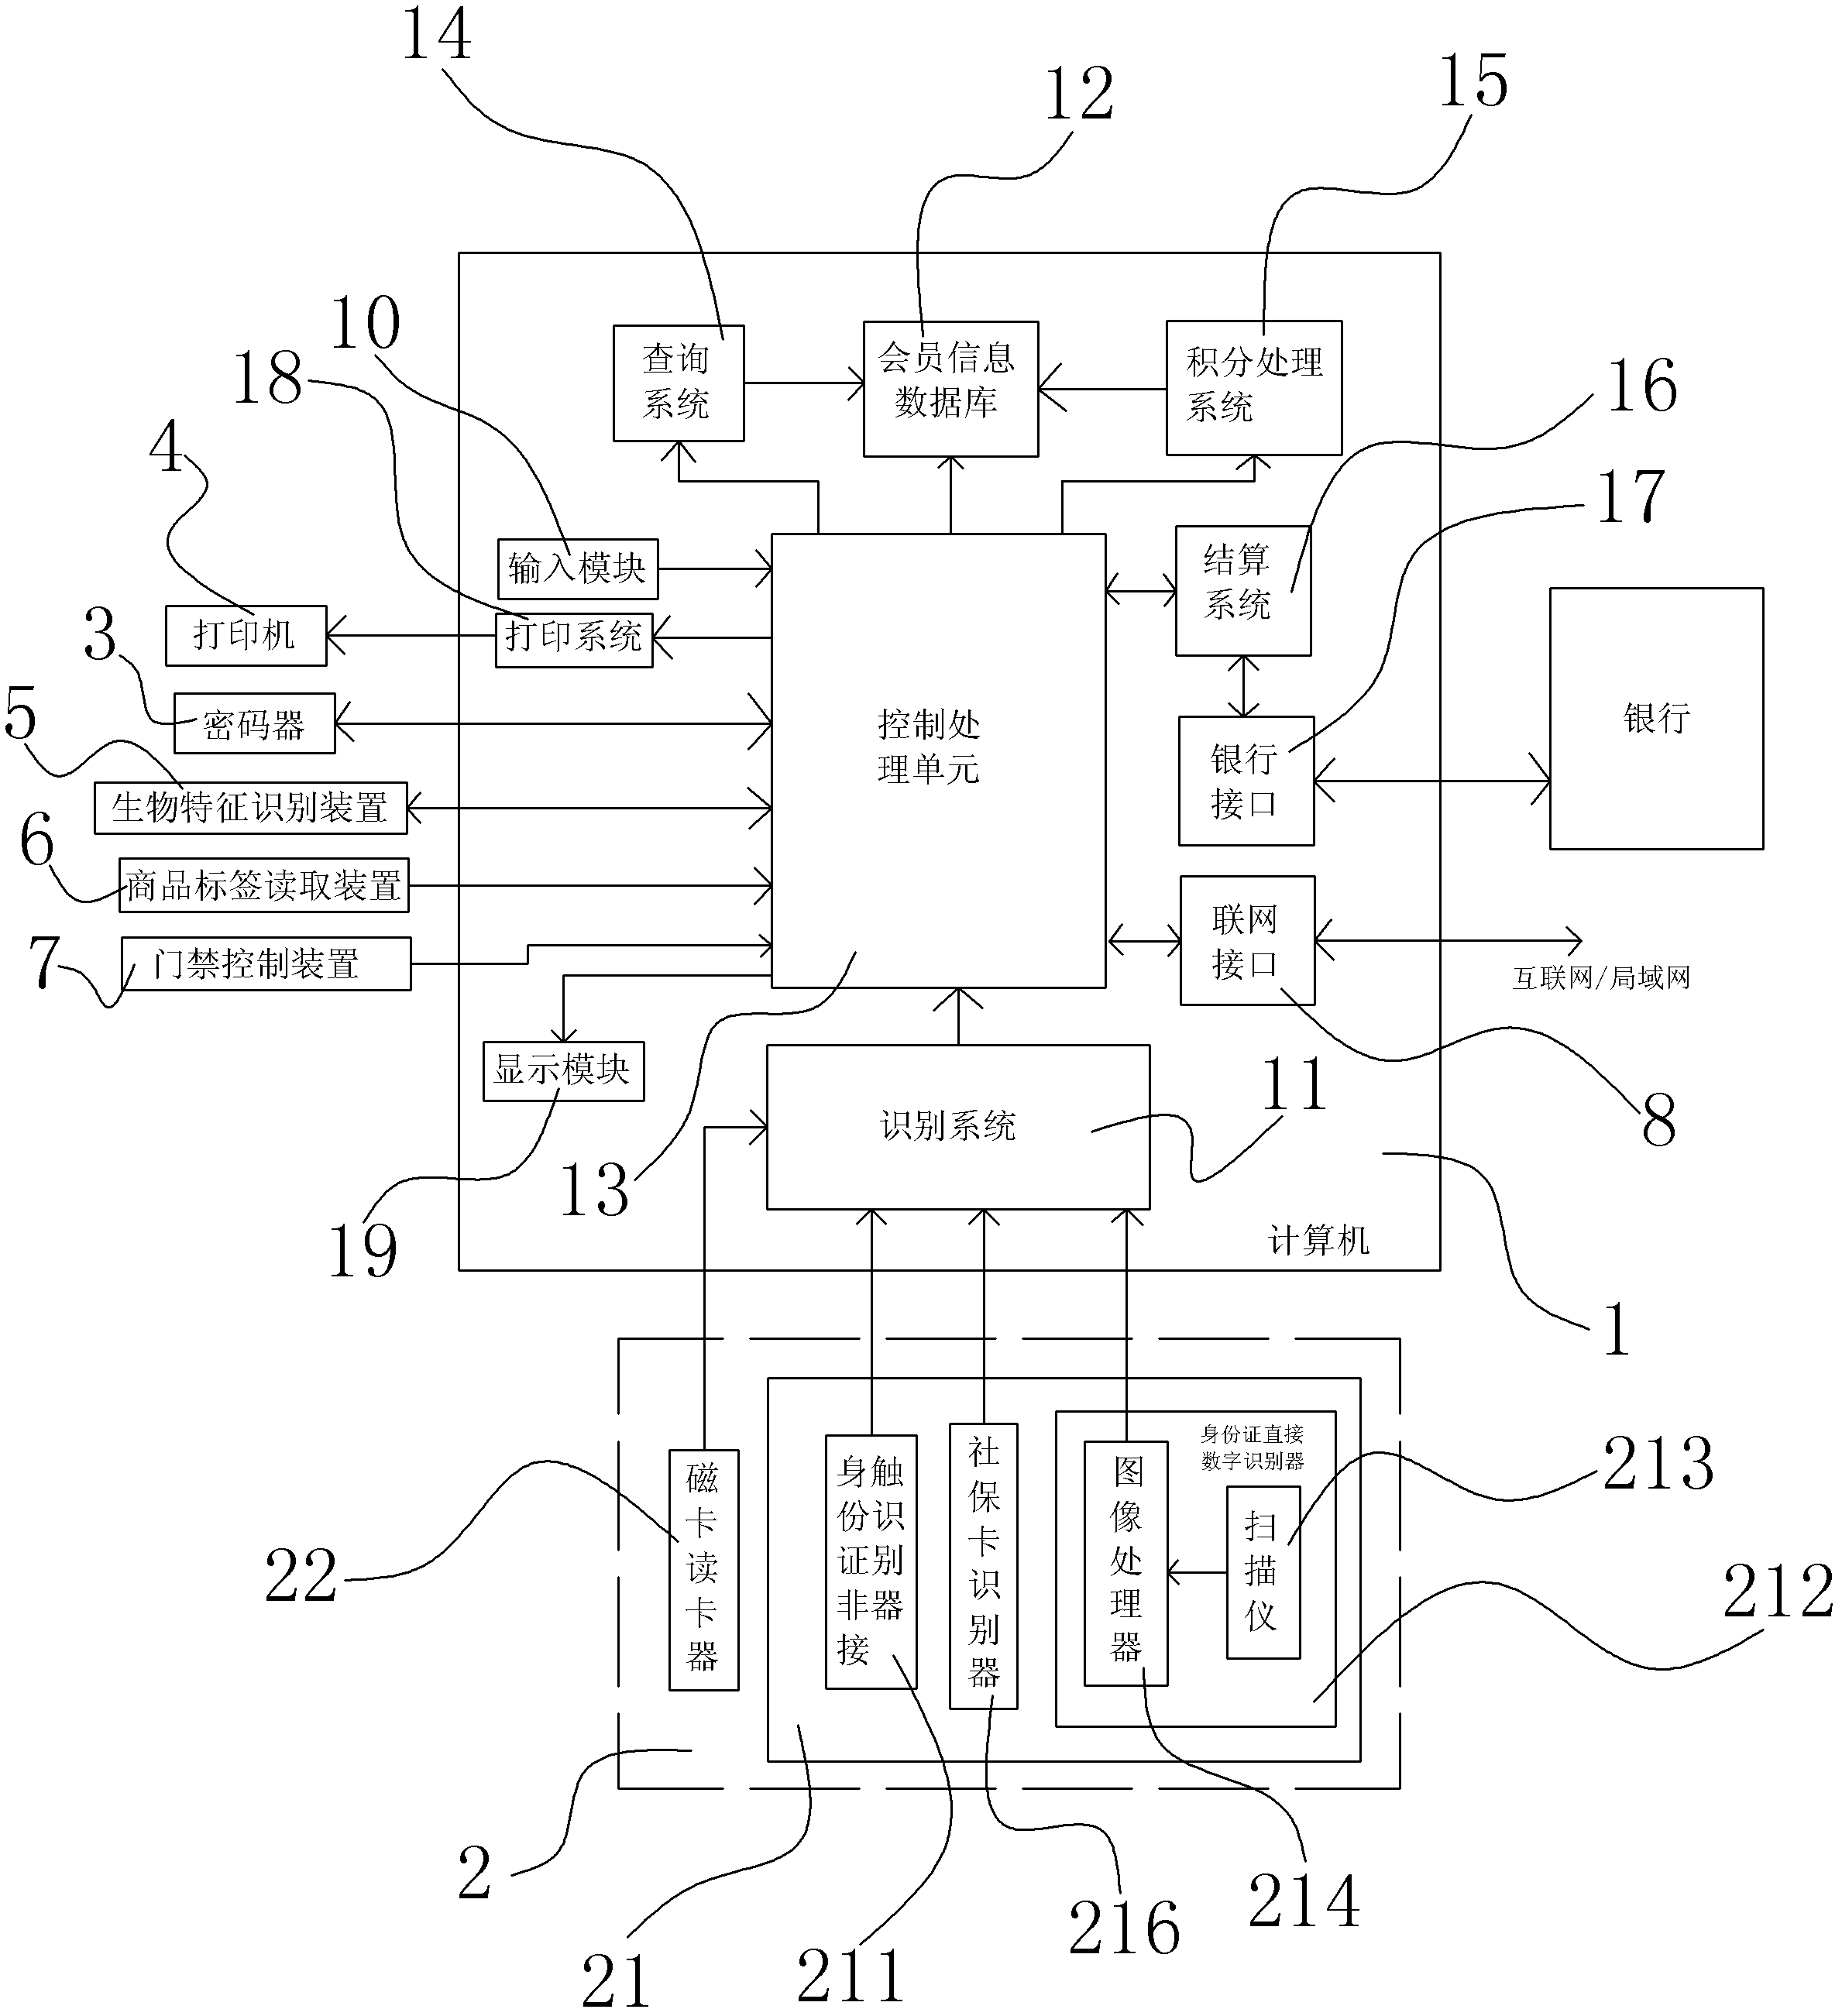 Member function system based on identity card recognition function